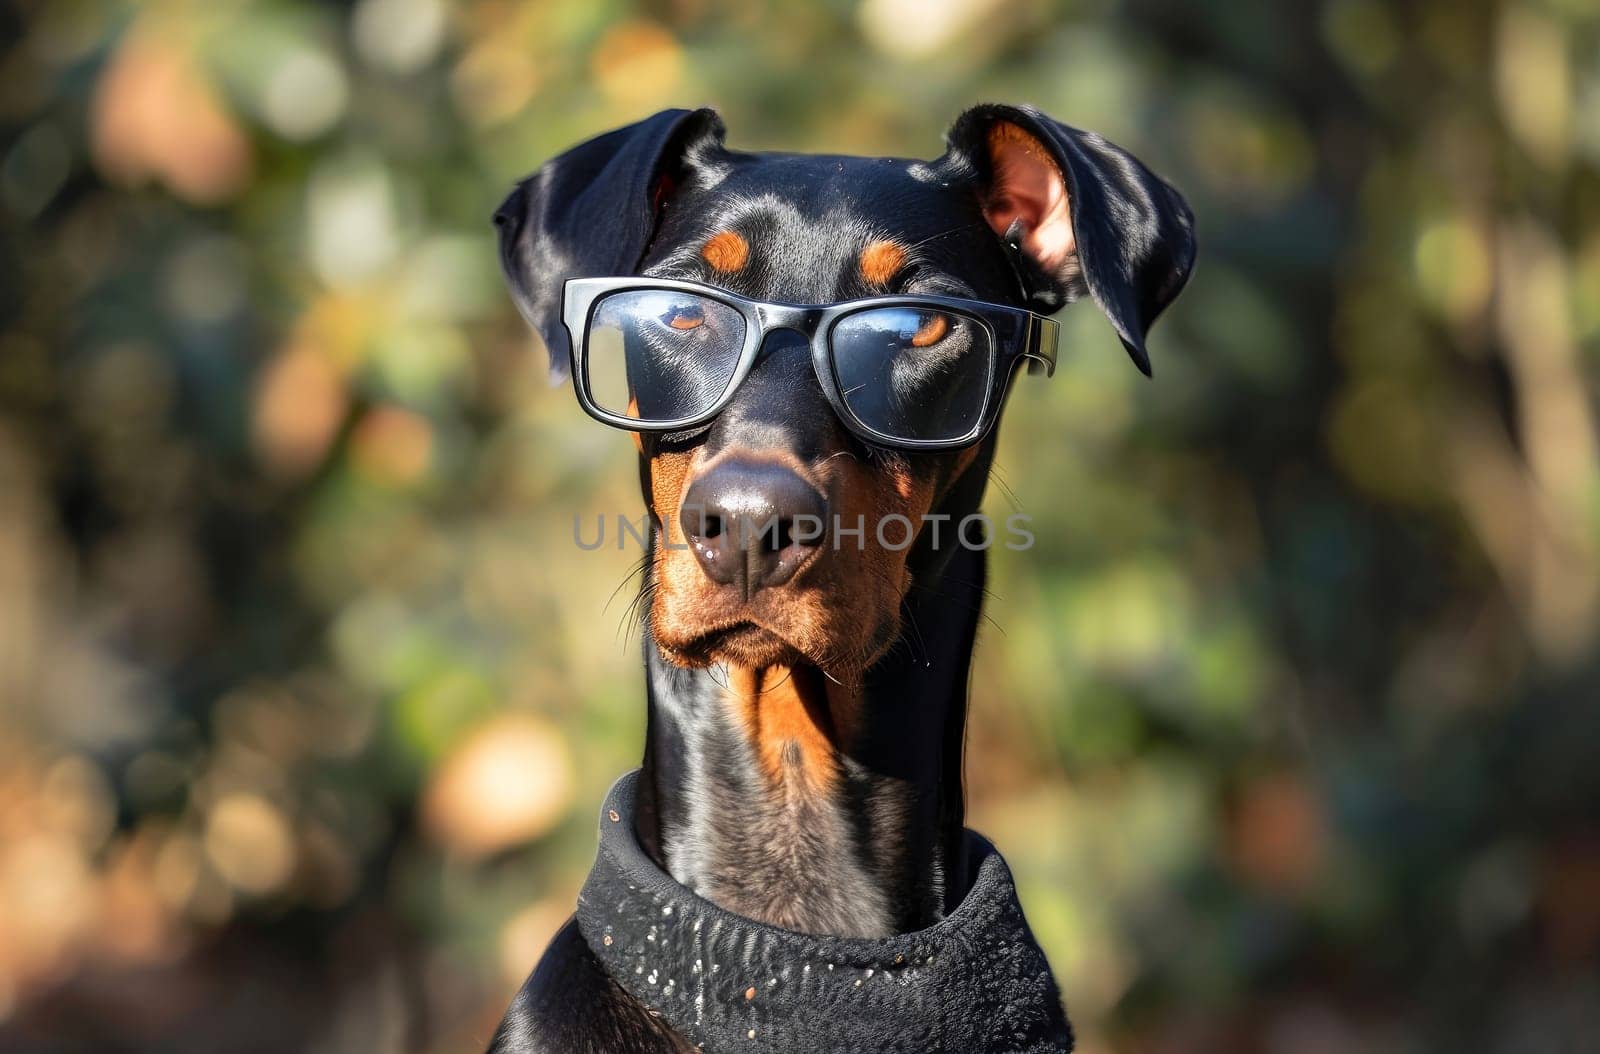 A stylish black and brown dog looking cool in sunglasses and a cozy sweater